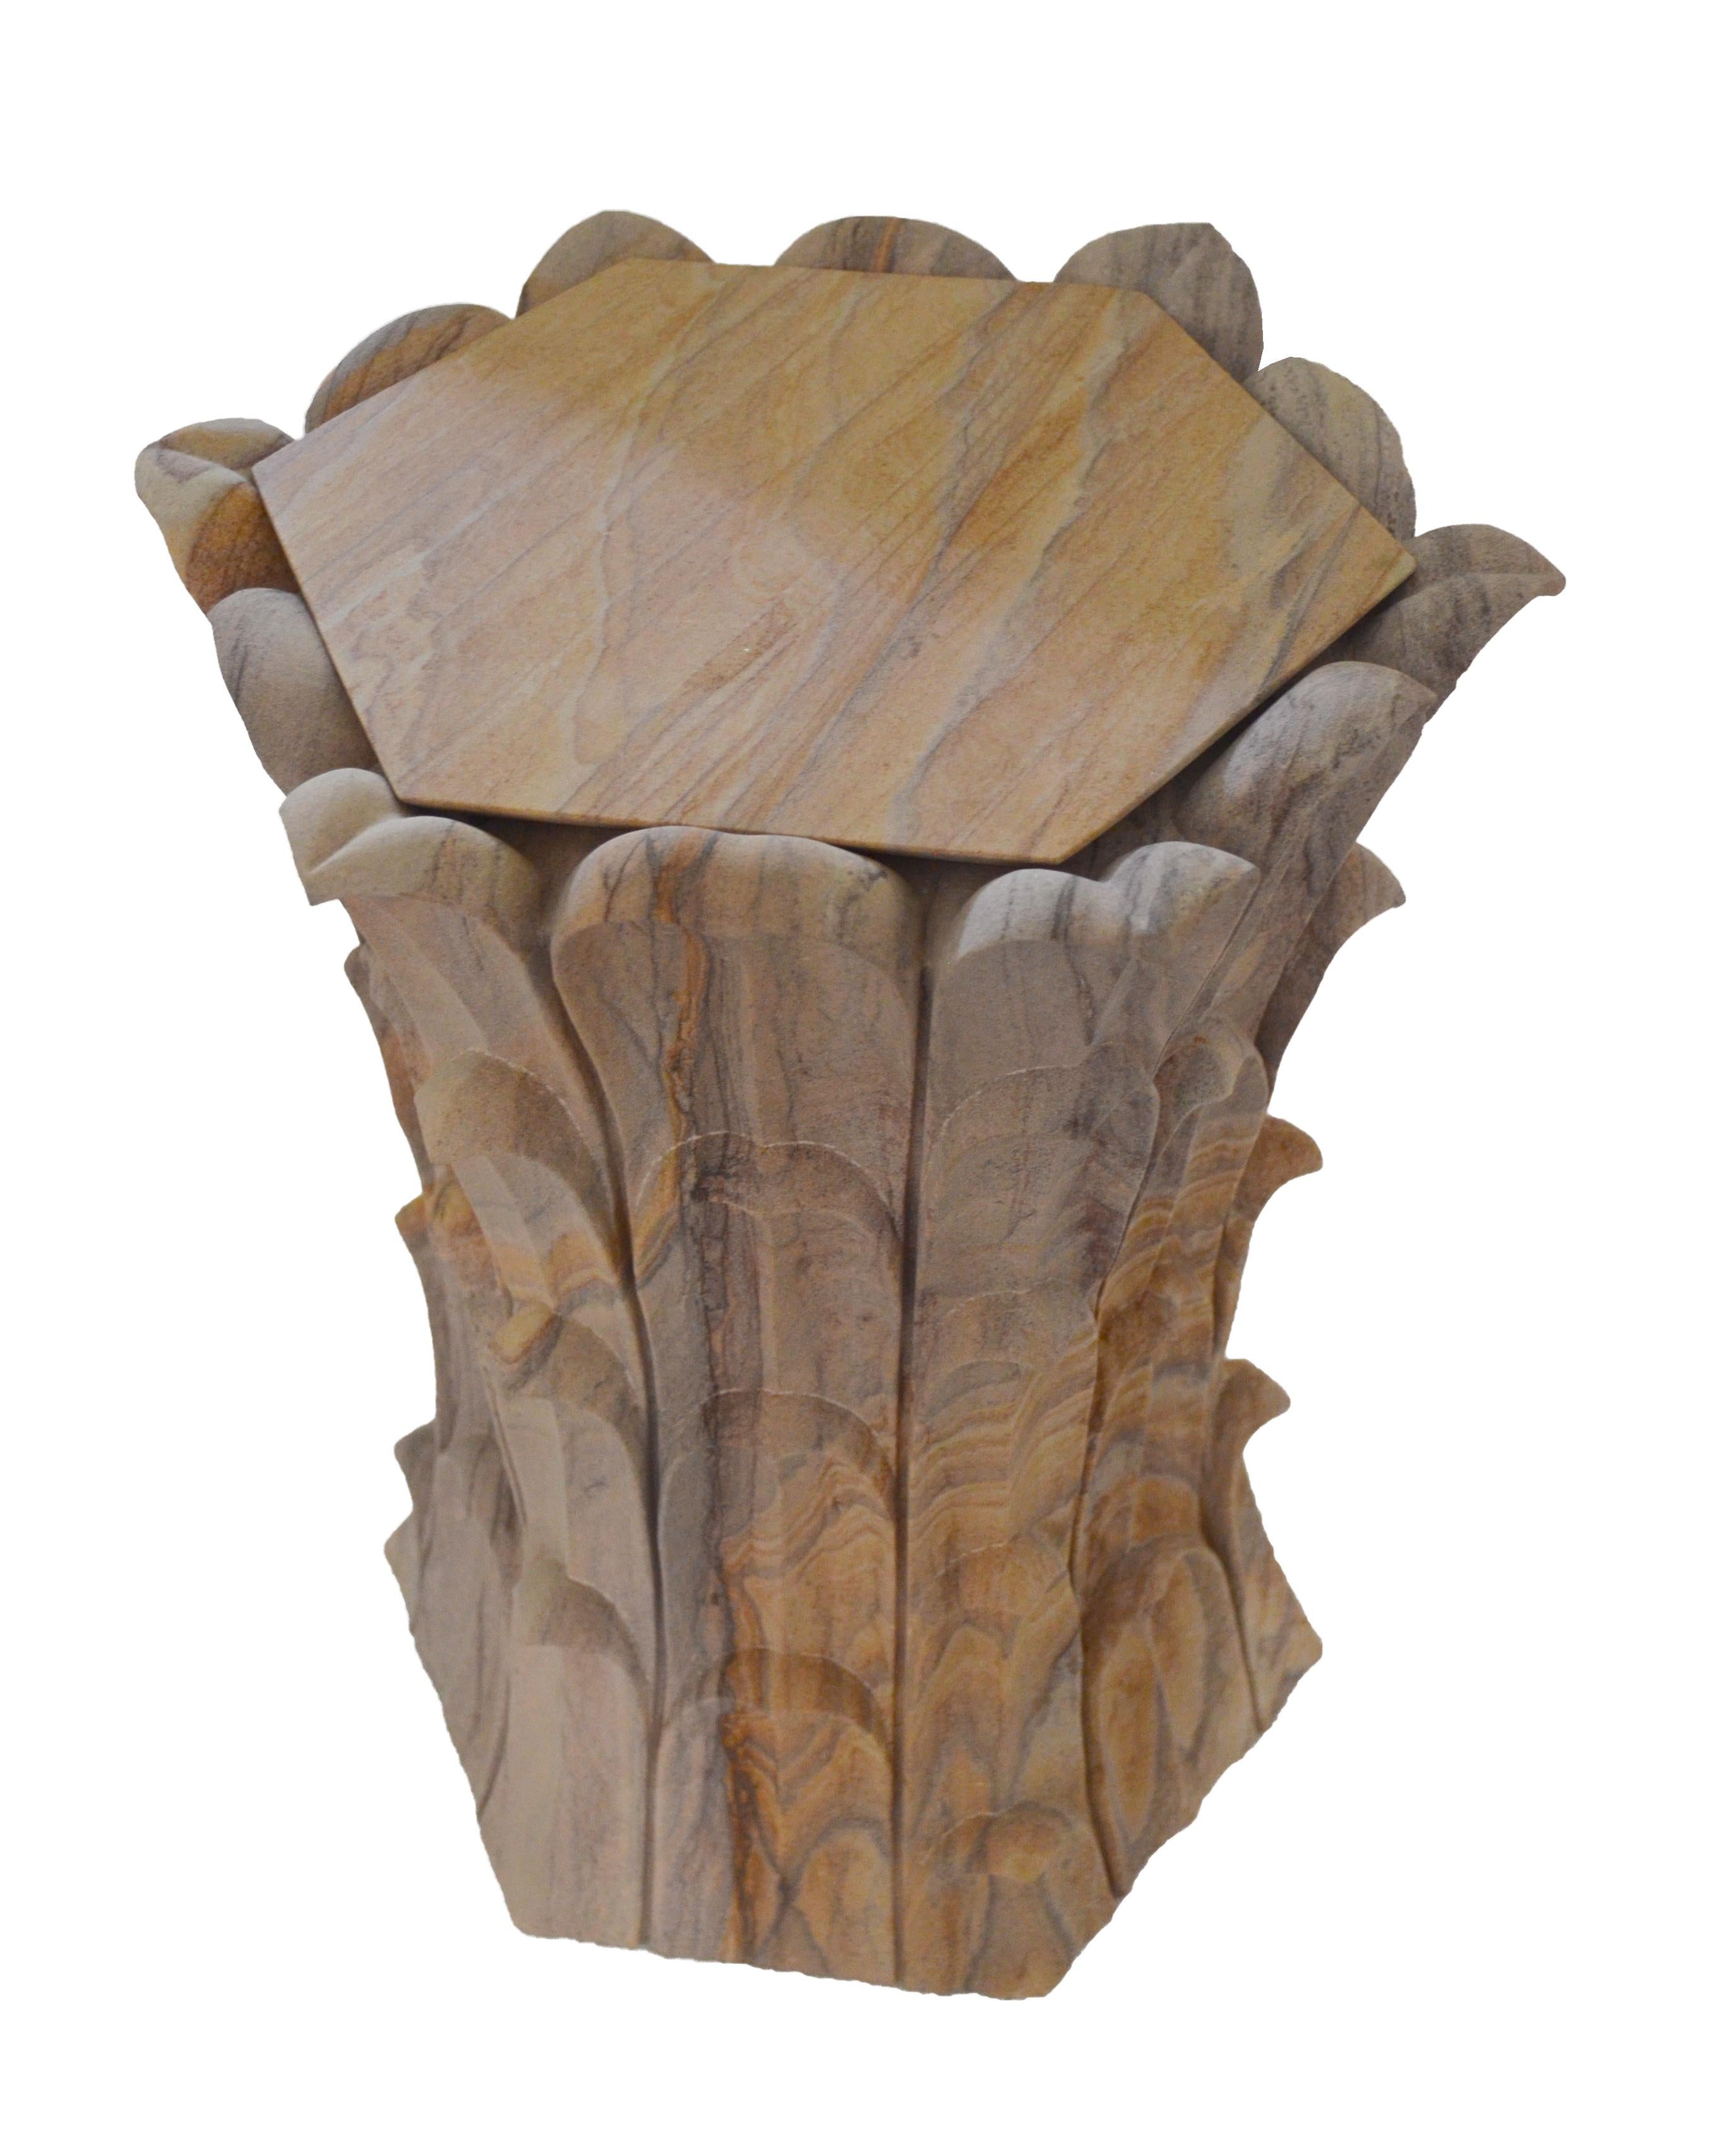 Inspired by the temple carvings in and around Udaipur, Stephanie Odegard designed this unique side table using locally available stones. The arrangement of the carved leaf motif gives an impression of a dense Bamboo Grove.

Set of Two Bamboo Grove